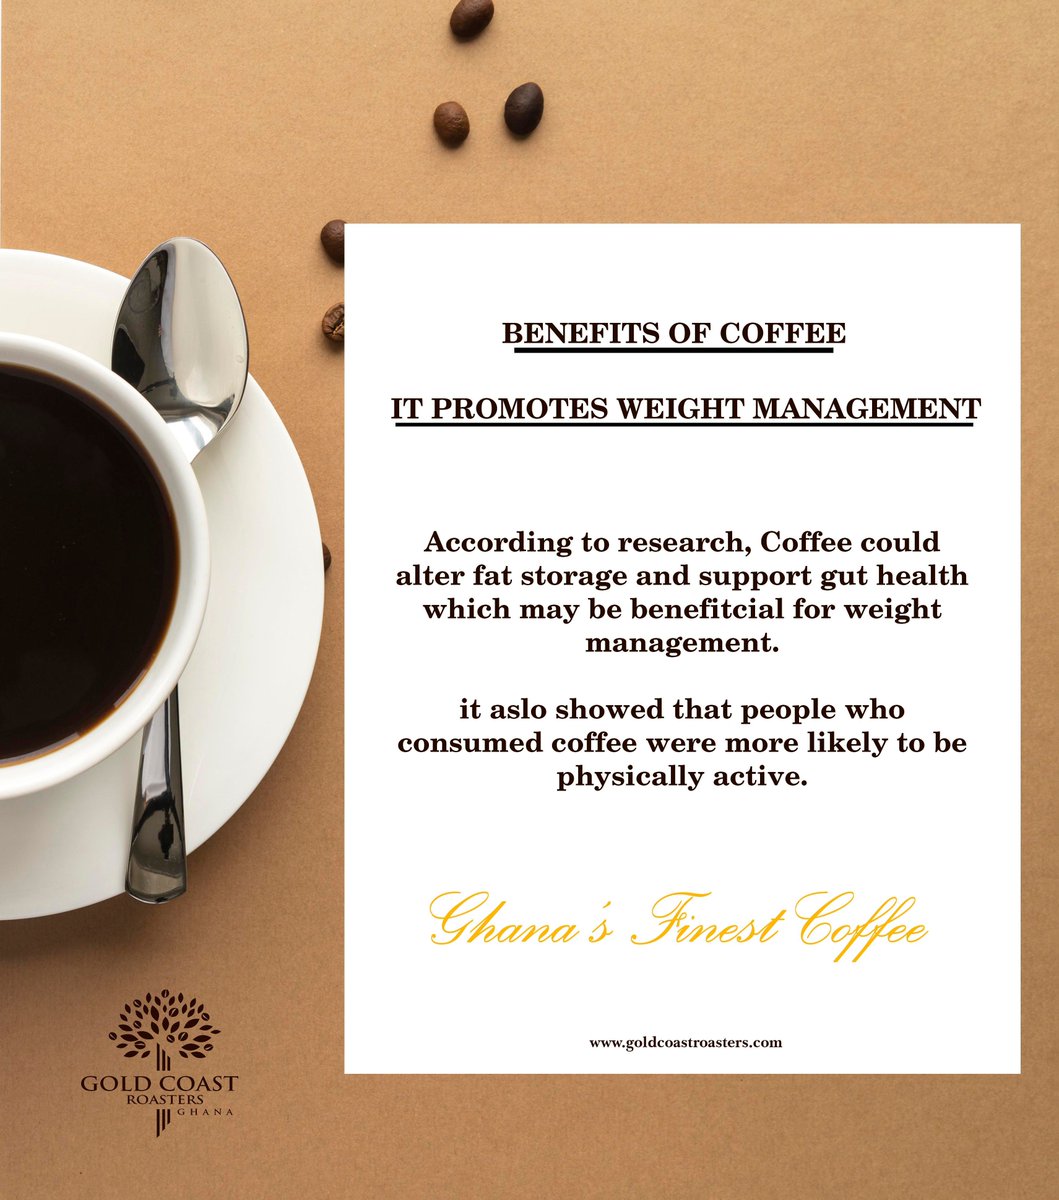 Do you know the benefits of drinking coffee? #coffee #madeinghana #coffeelover #coffeetime #madewithlove #teamGCR #benefitsofcoffee #coffeelifestyle #wearemadeinghana #coffeeexperience #coffeegoodness #coffeeislife